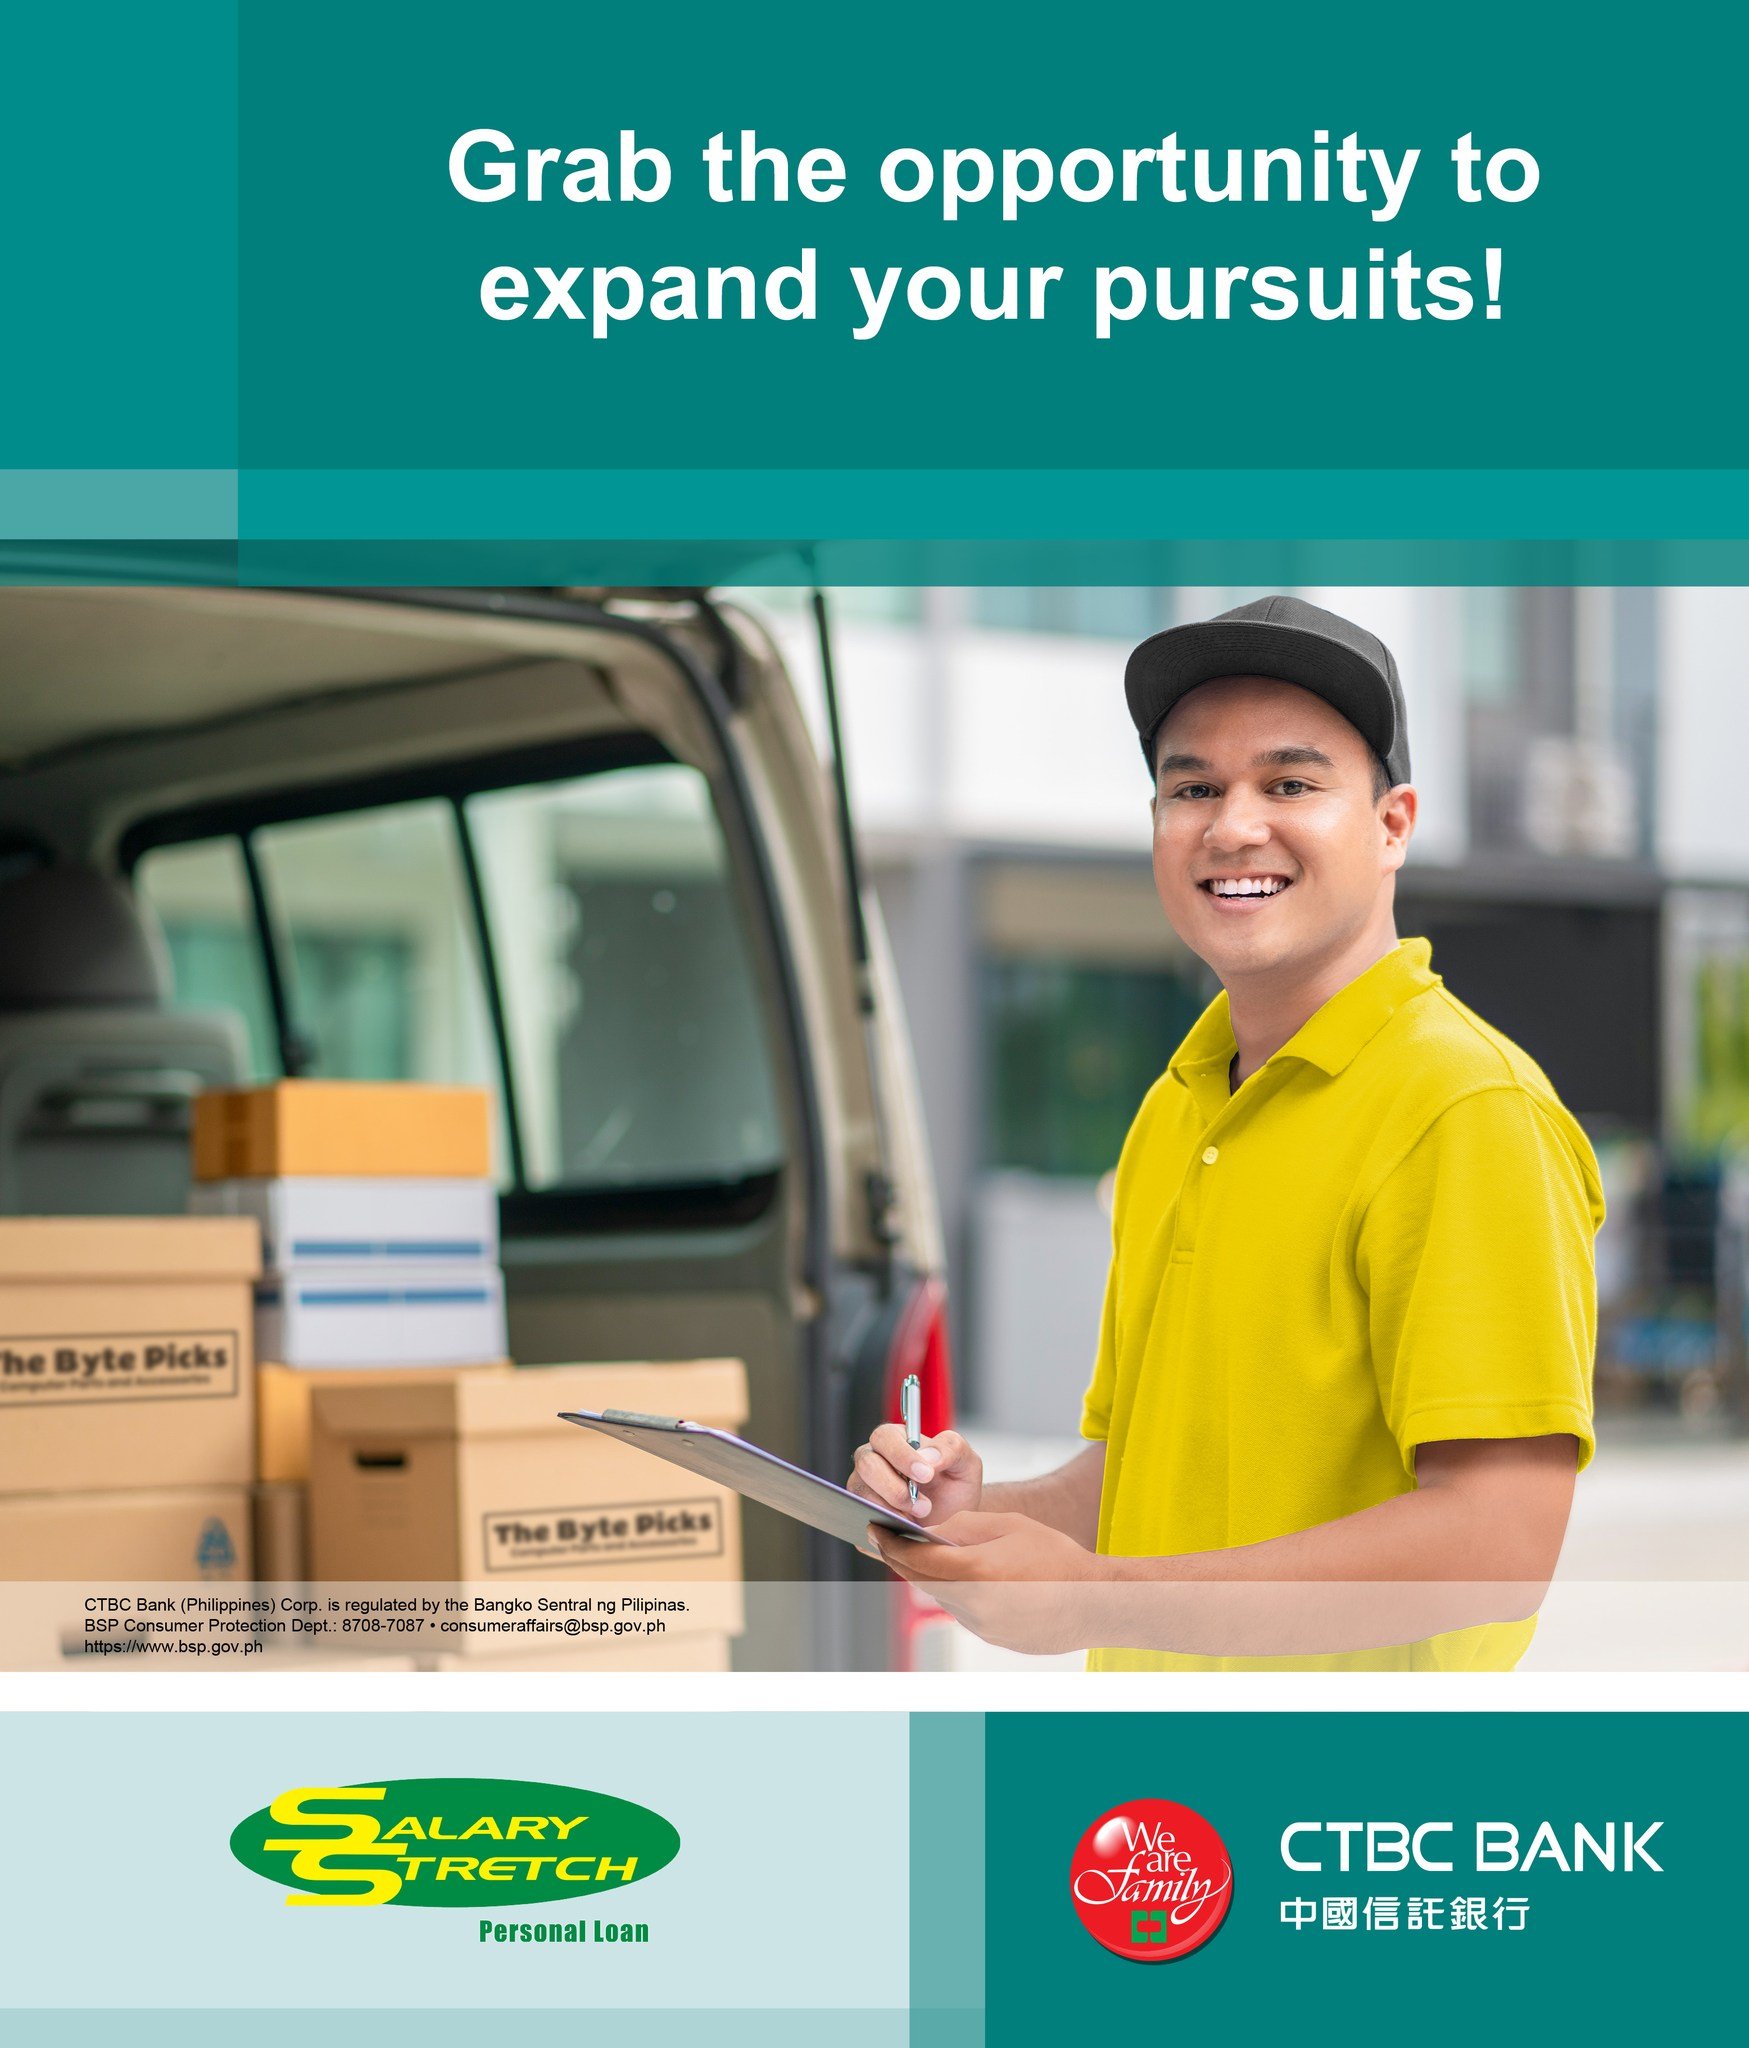 ctbc online loan application - hobbies and passions